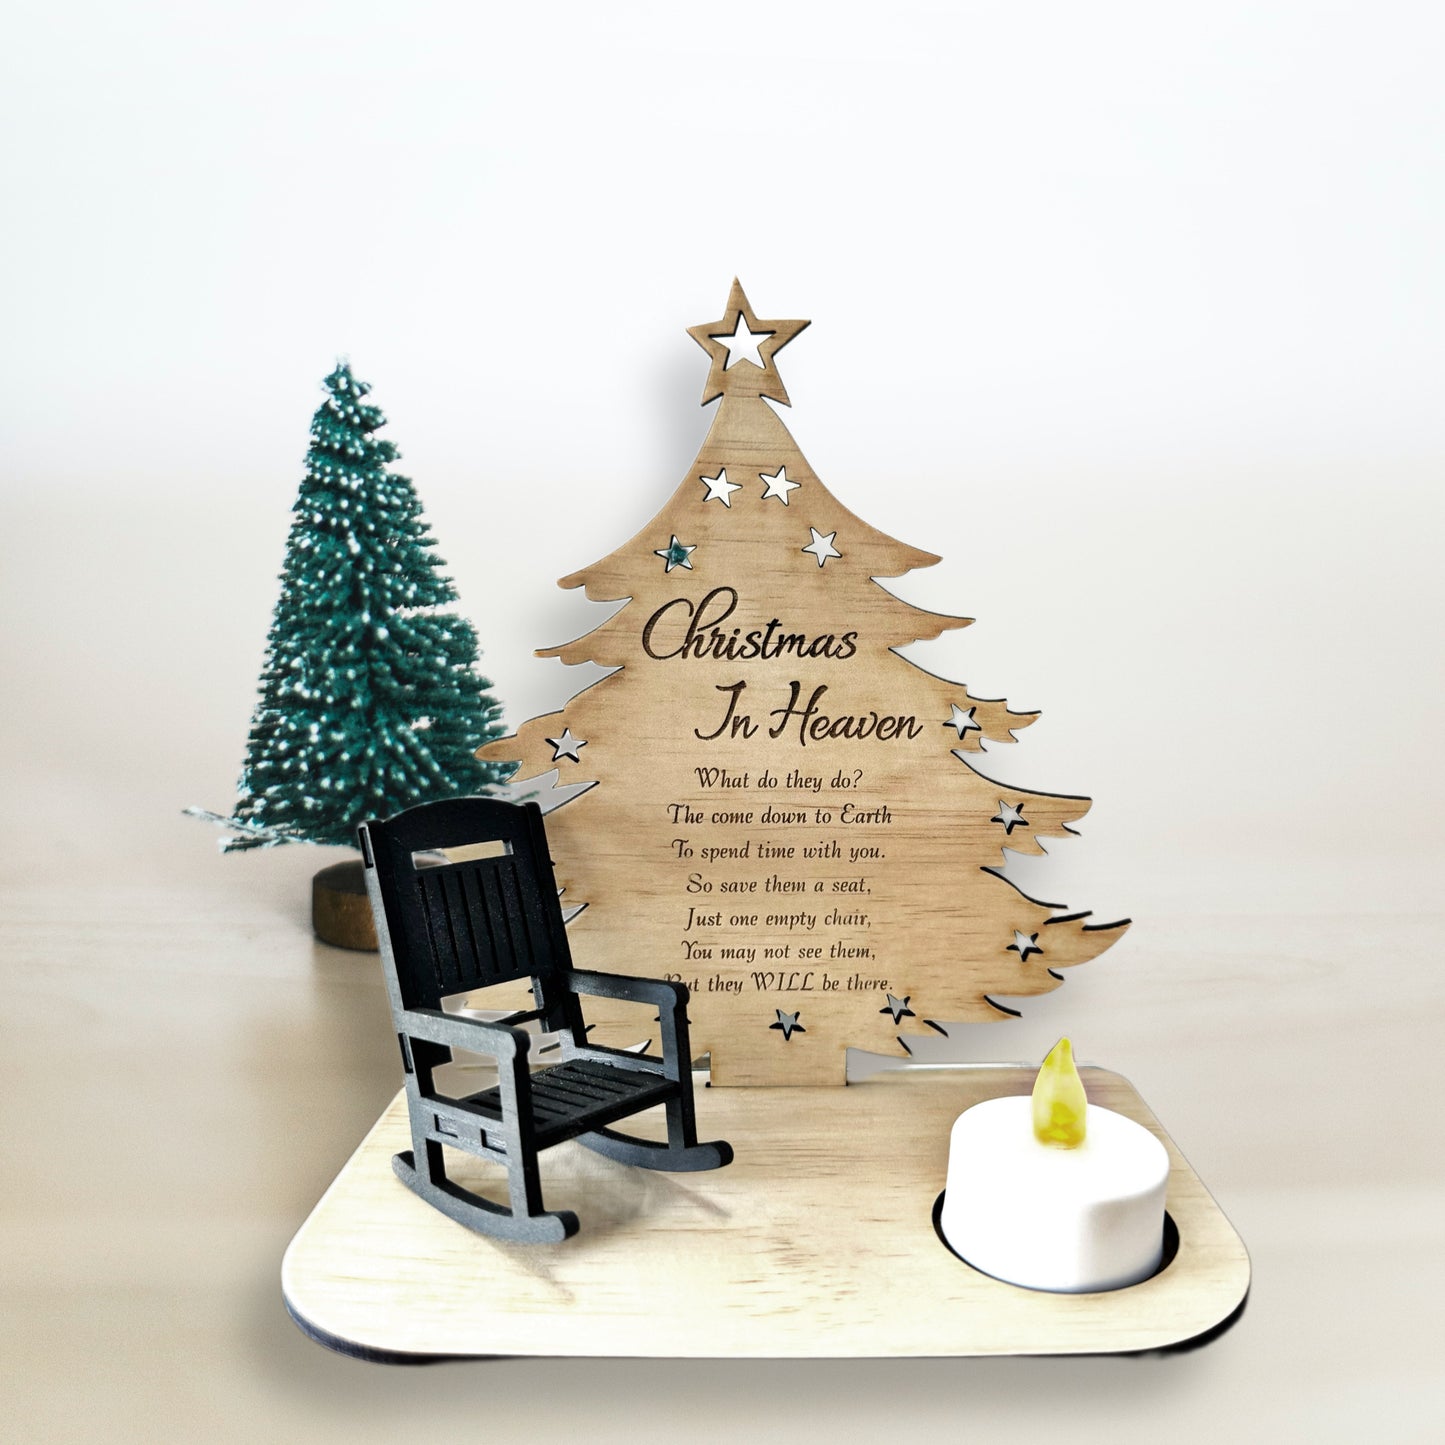 Christmas in Heaven Memorial Tree with wooden Rocking chair and Candle